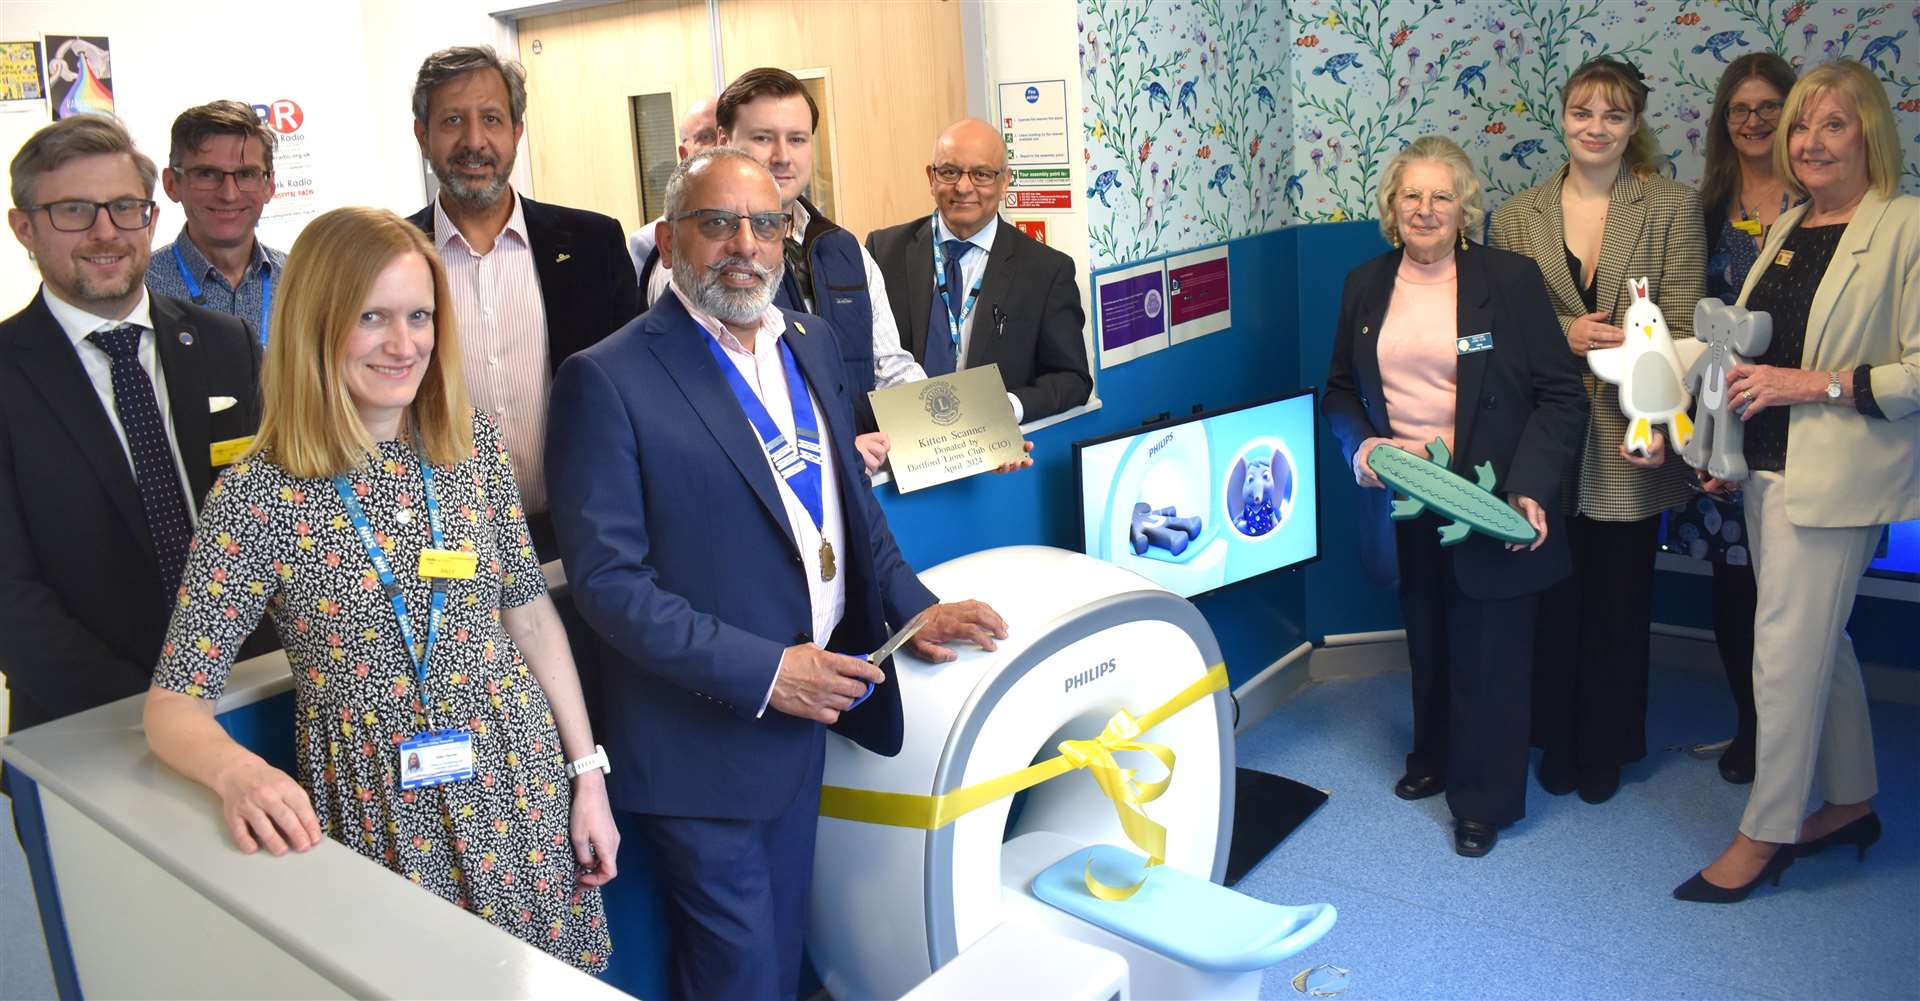 The Lions Club president Avtar Sandhu and his fellow Lions paid a visit to the hospital to unveil the new equipment. Photo credit: Dartford and Gravesham NHS Trust